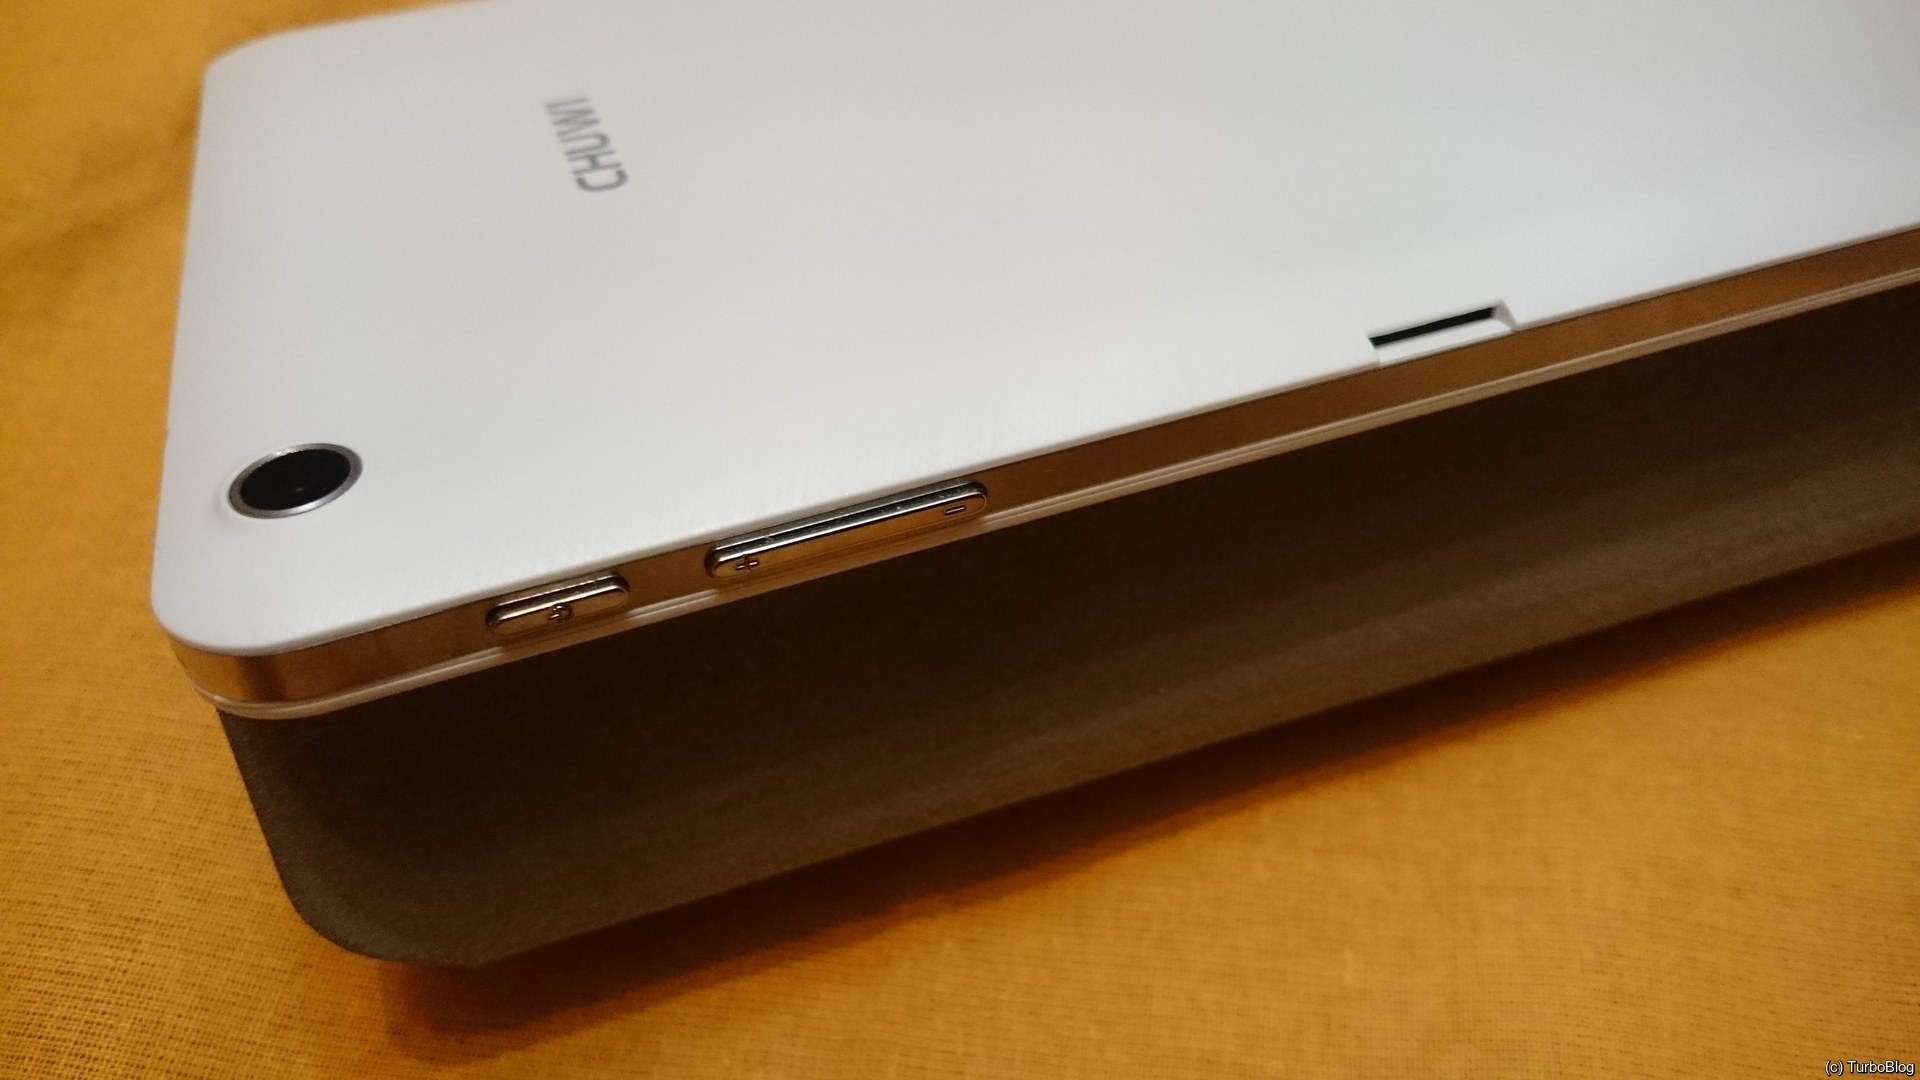 Really like the metal line around the device, micro SD slot is not covered though